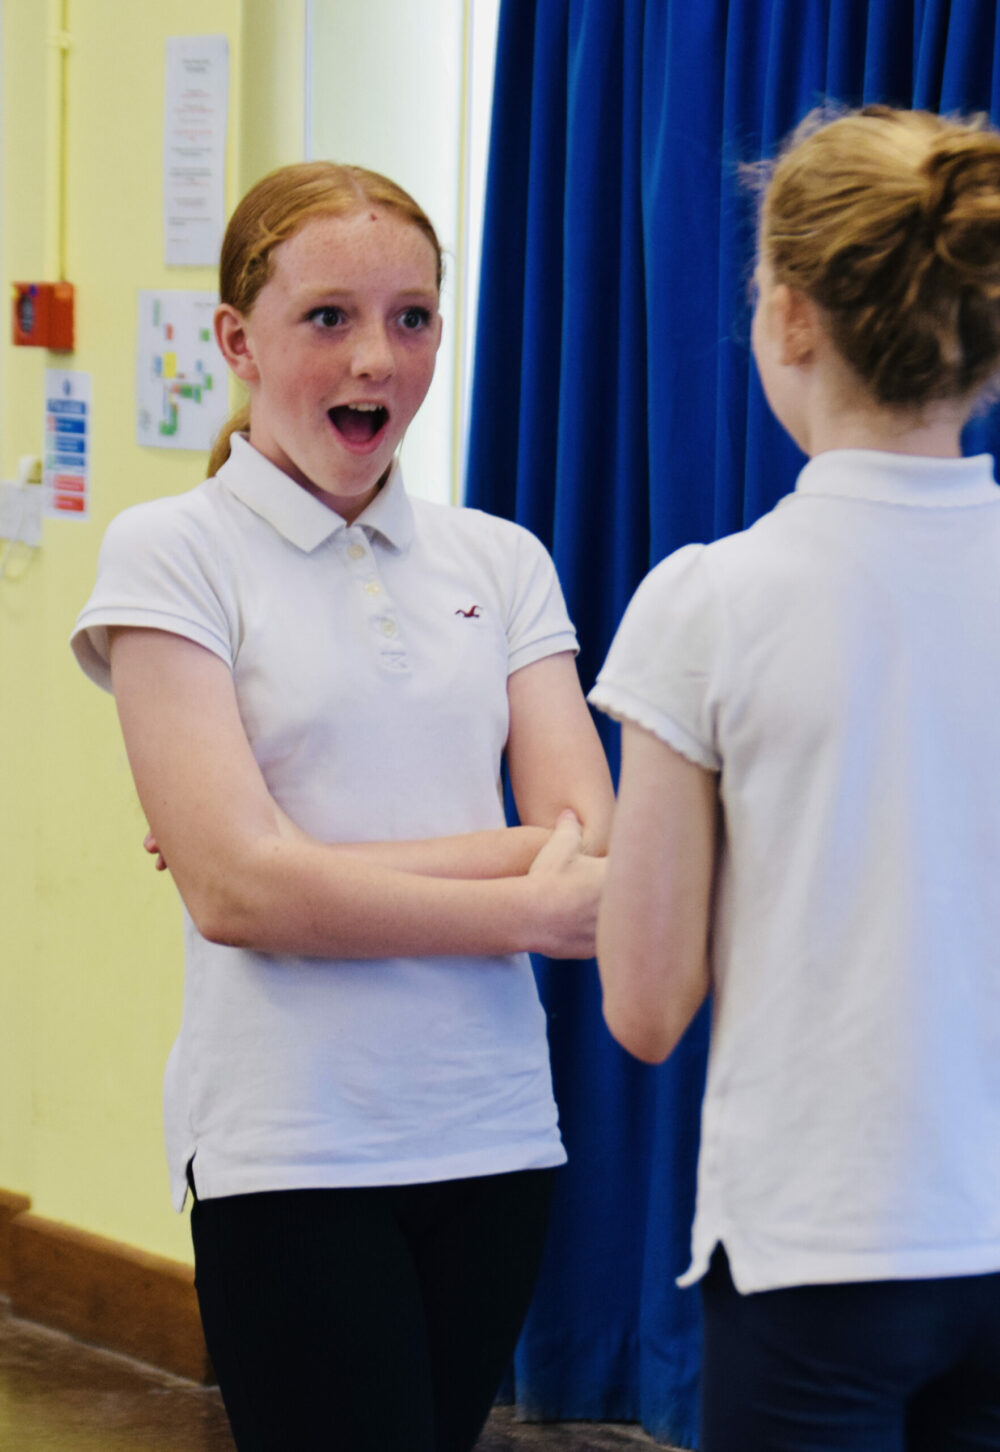 Two school children doing a drama role play activity.